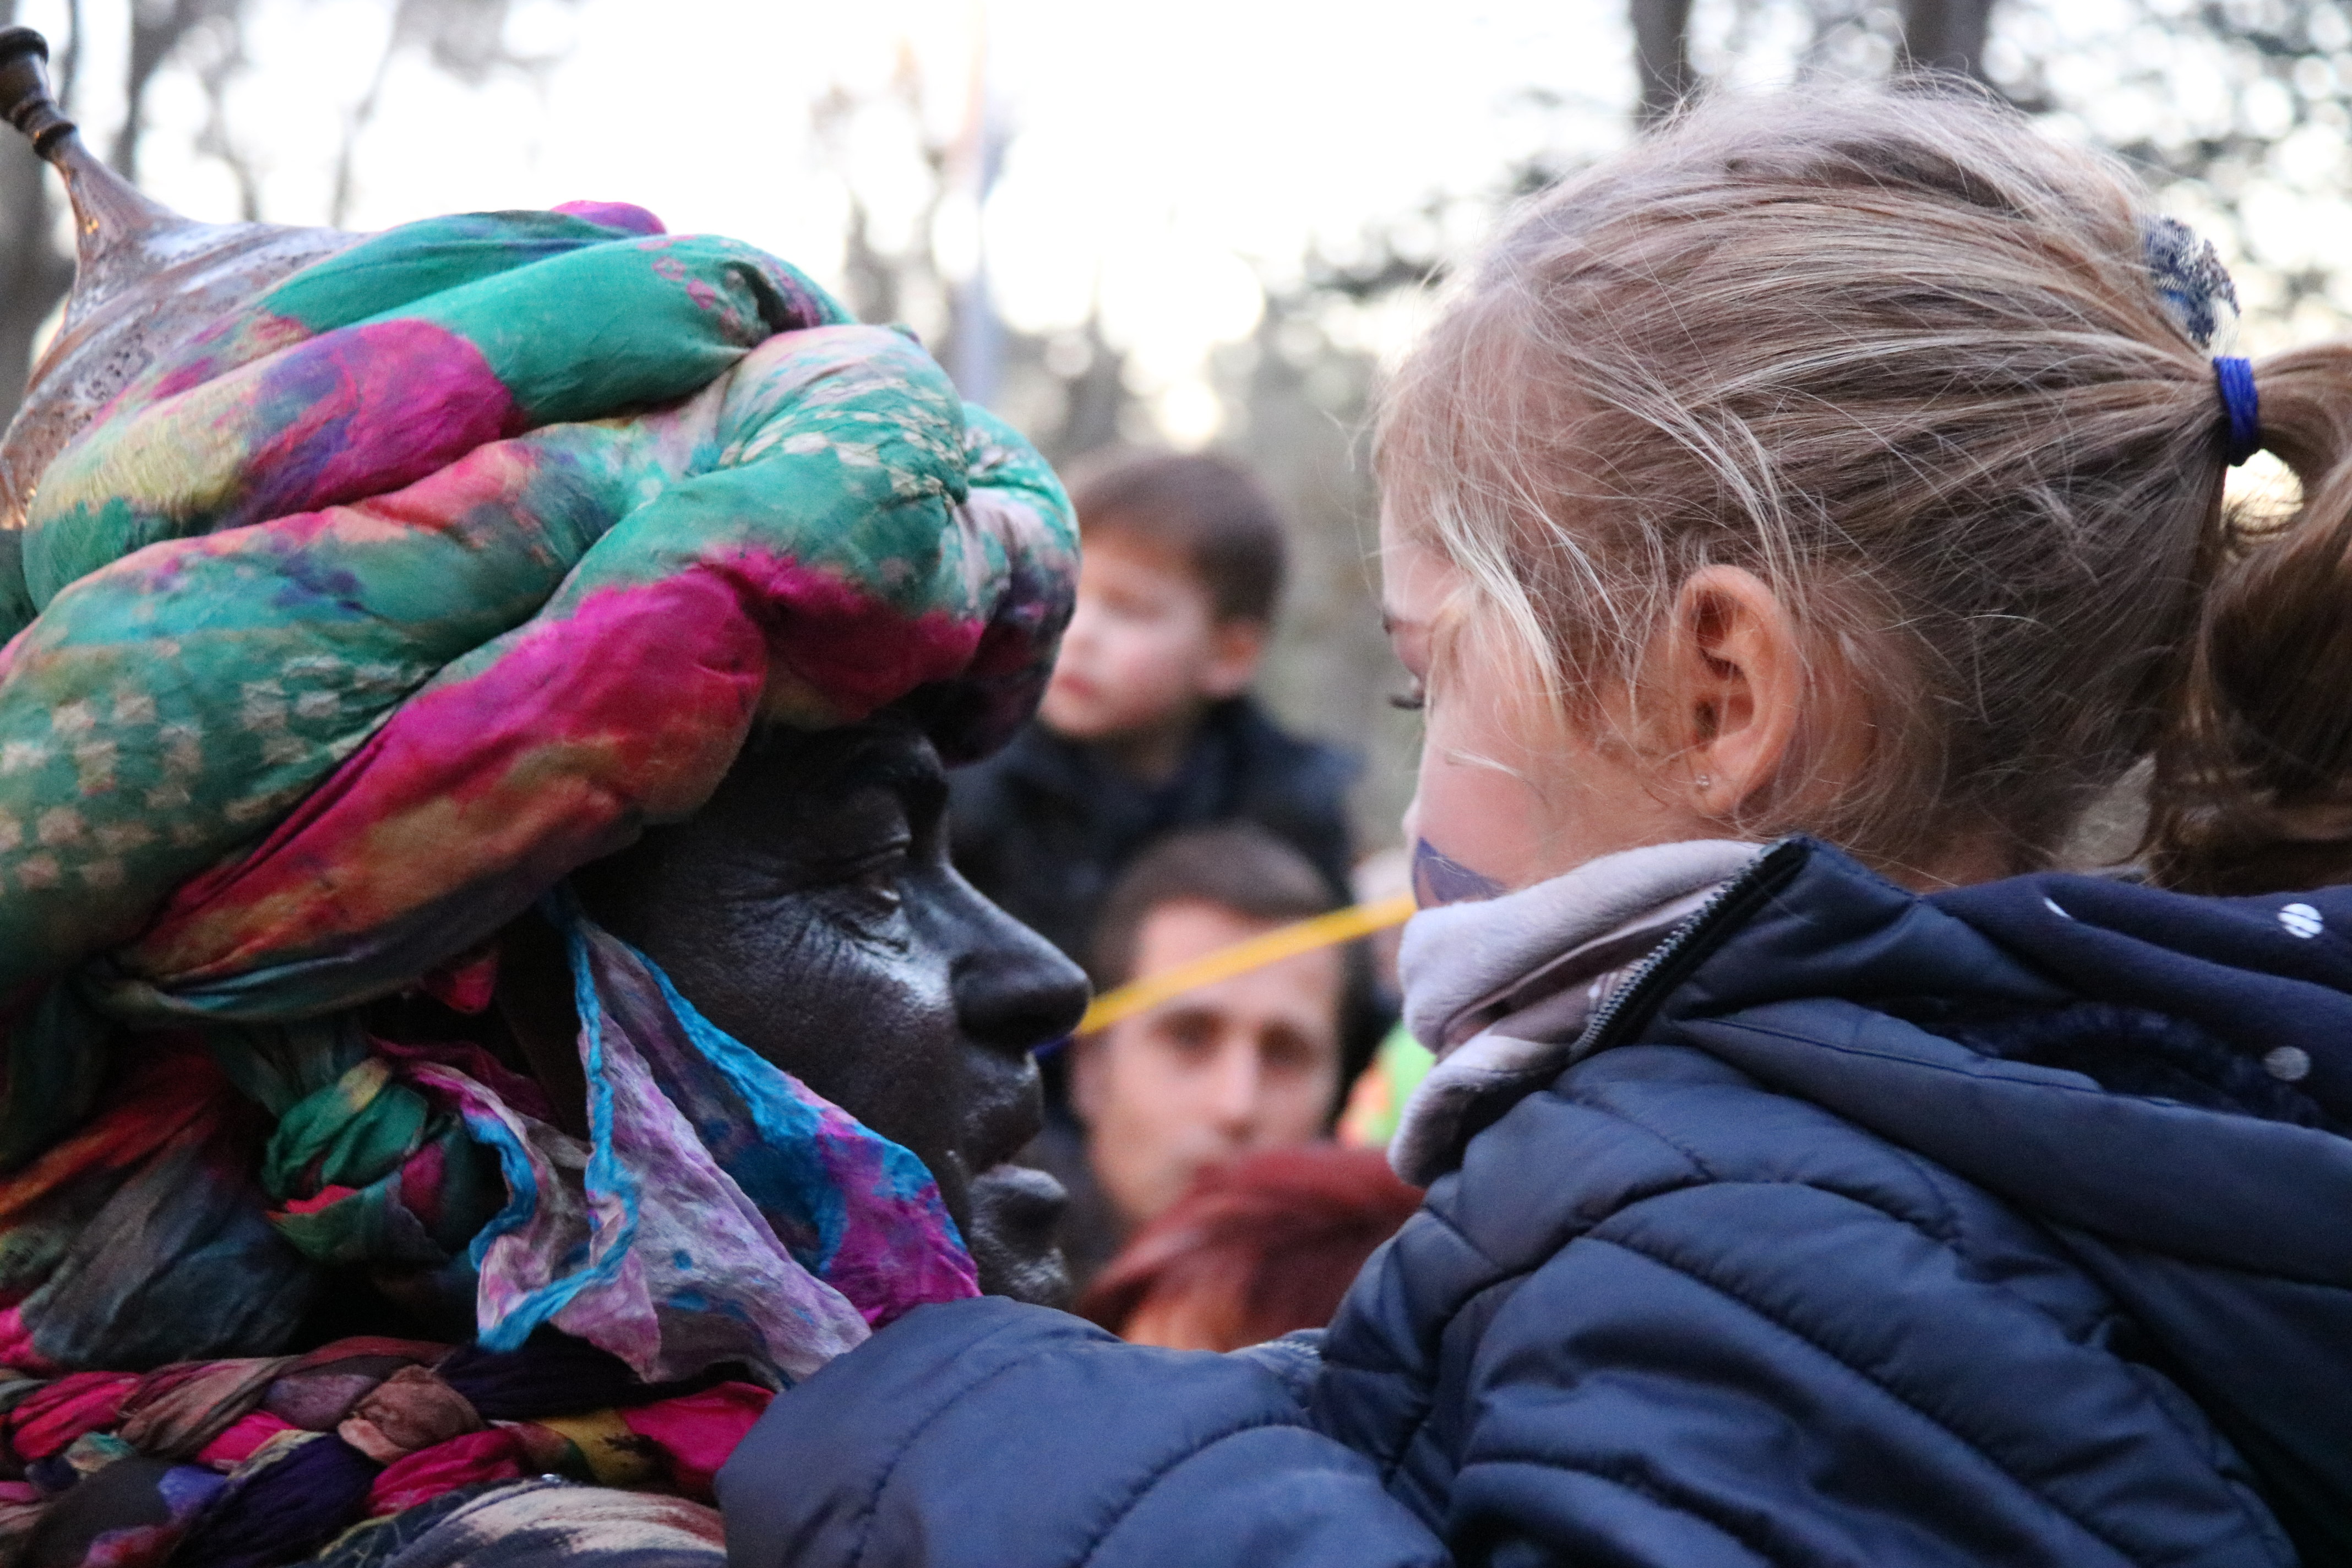 A white man with his face painted black to portray Balthazar, one of the Three Wise Men, in Girona (by Gerard Vilà)